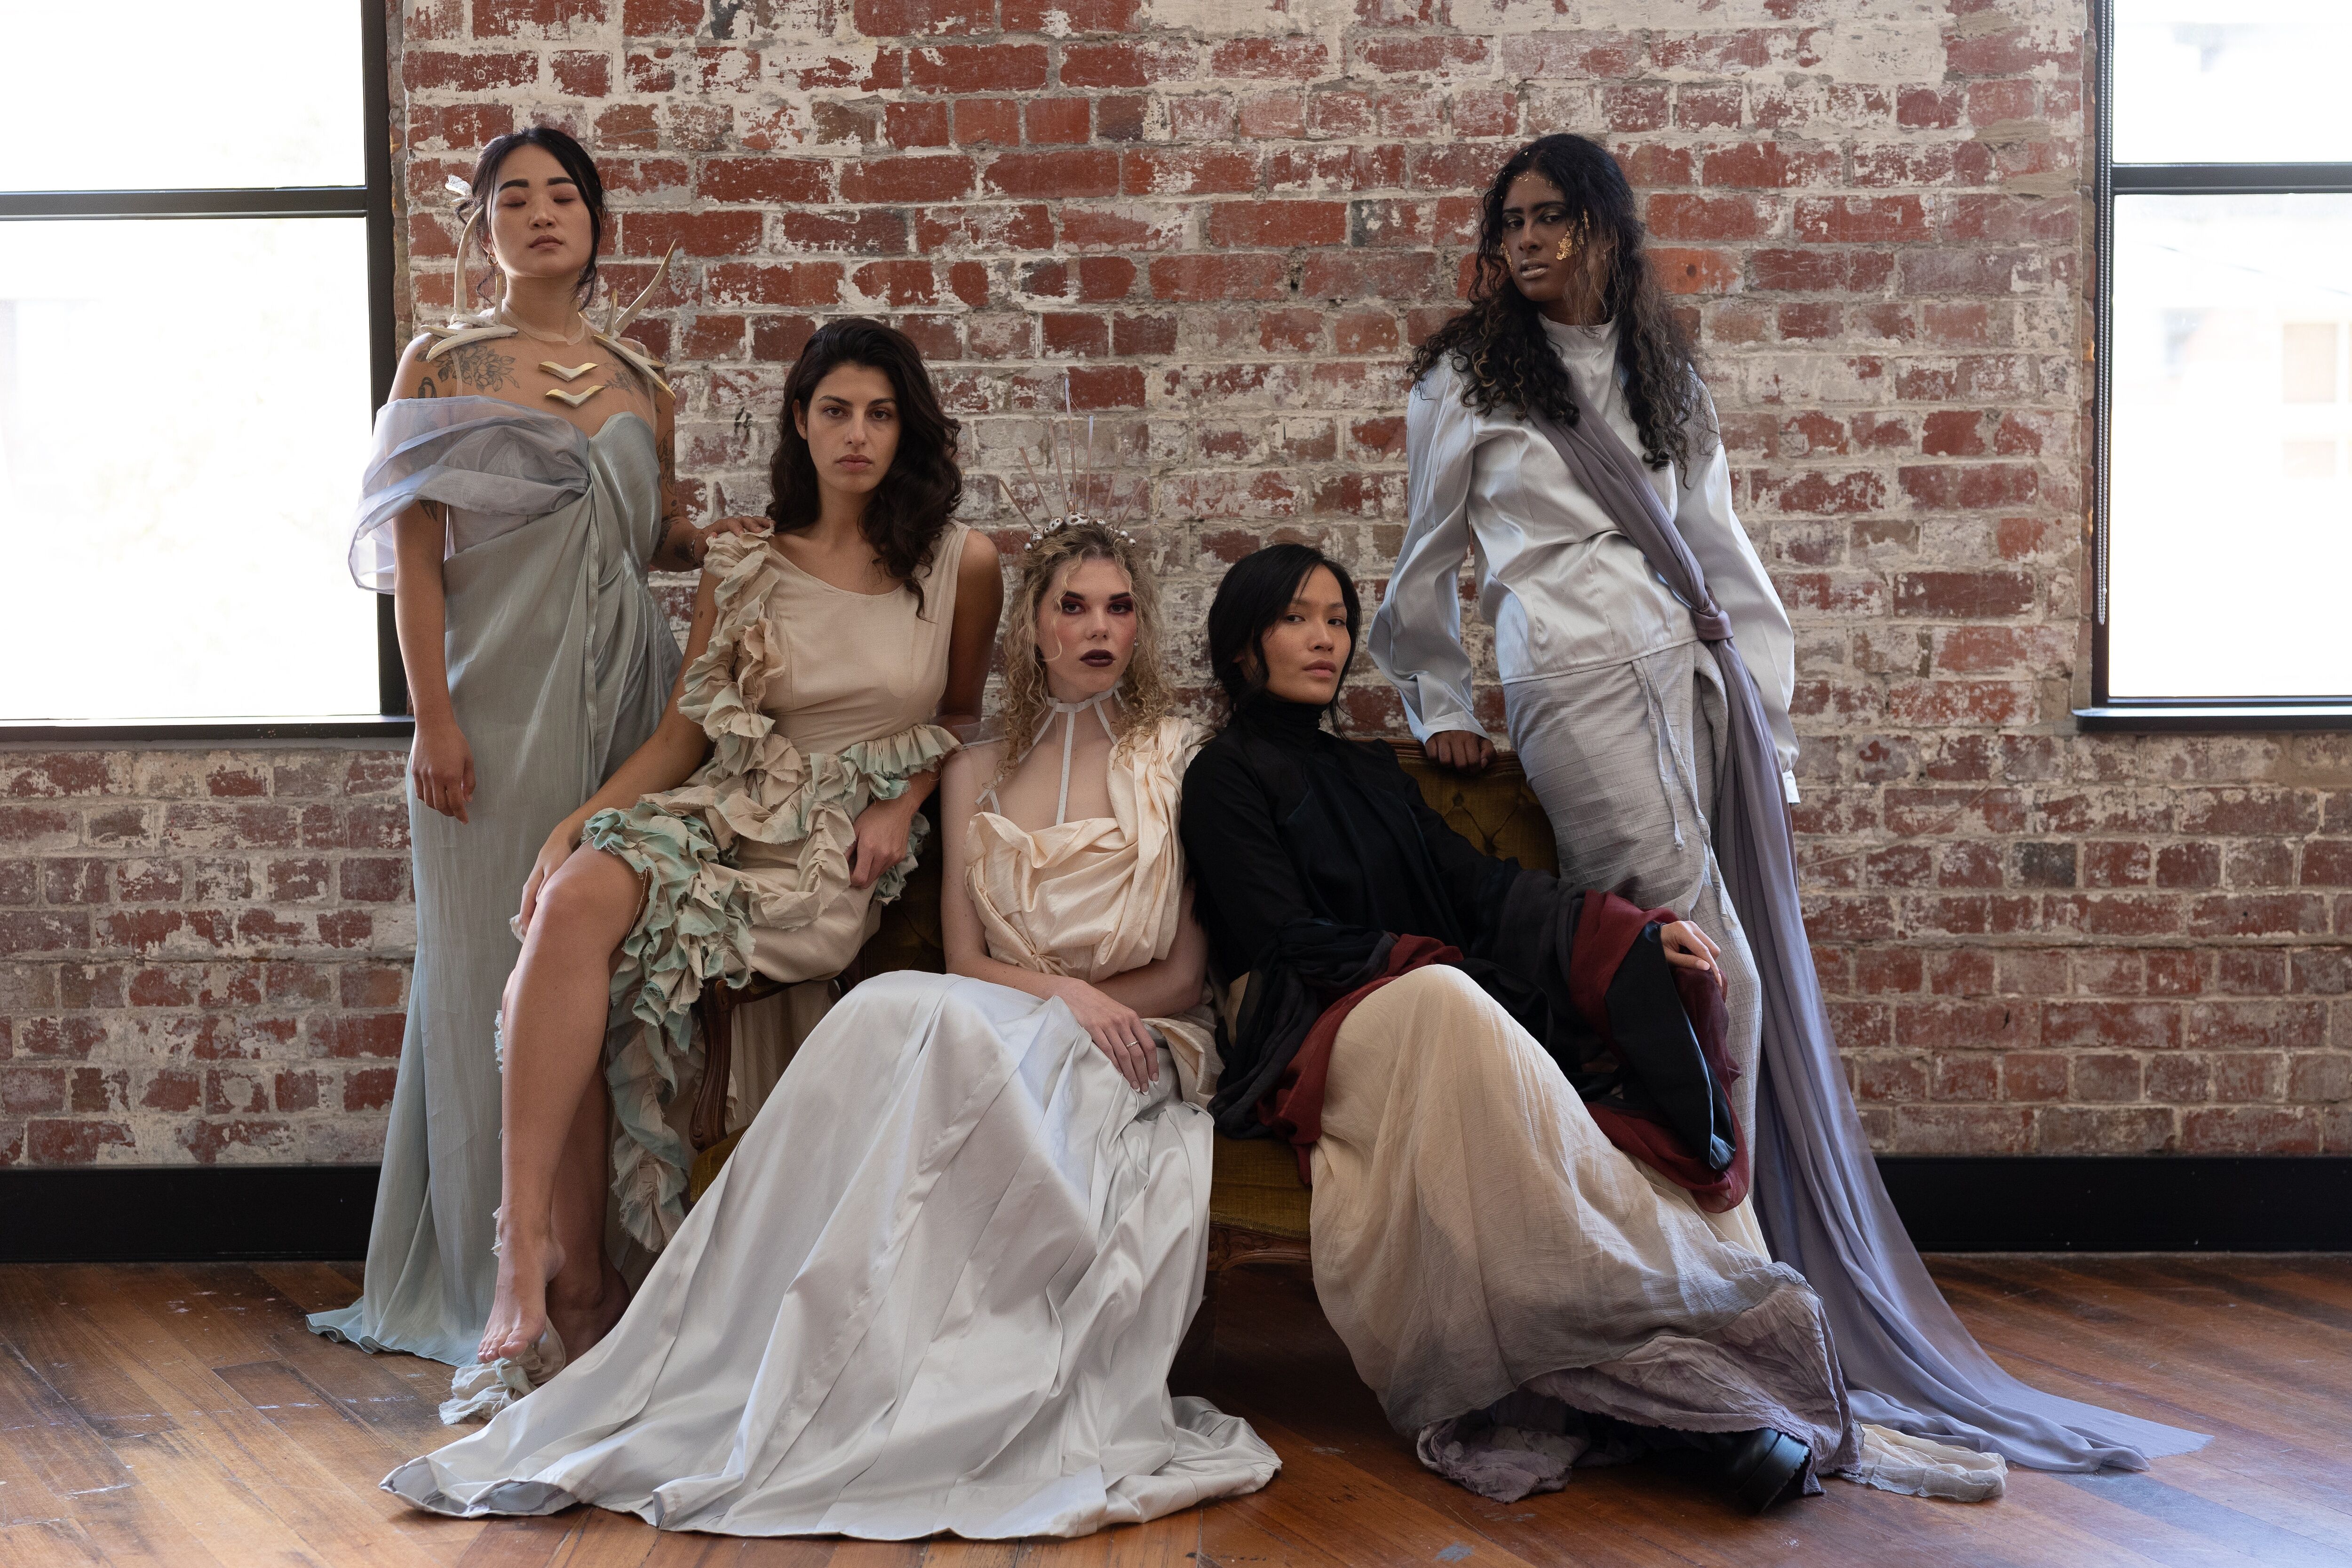 Five models posing in a rustic loft, each adorned in unique, flowy avant-garde attire, exuding an air of contemporary elegance against the exposed brick backdrop.